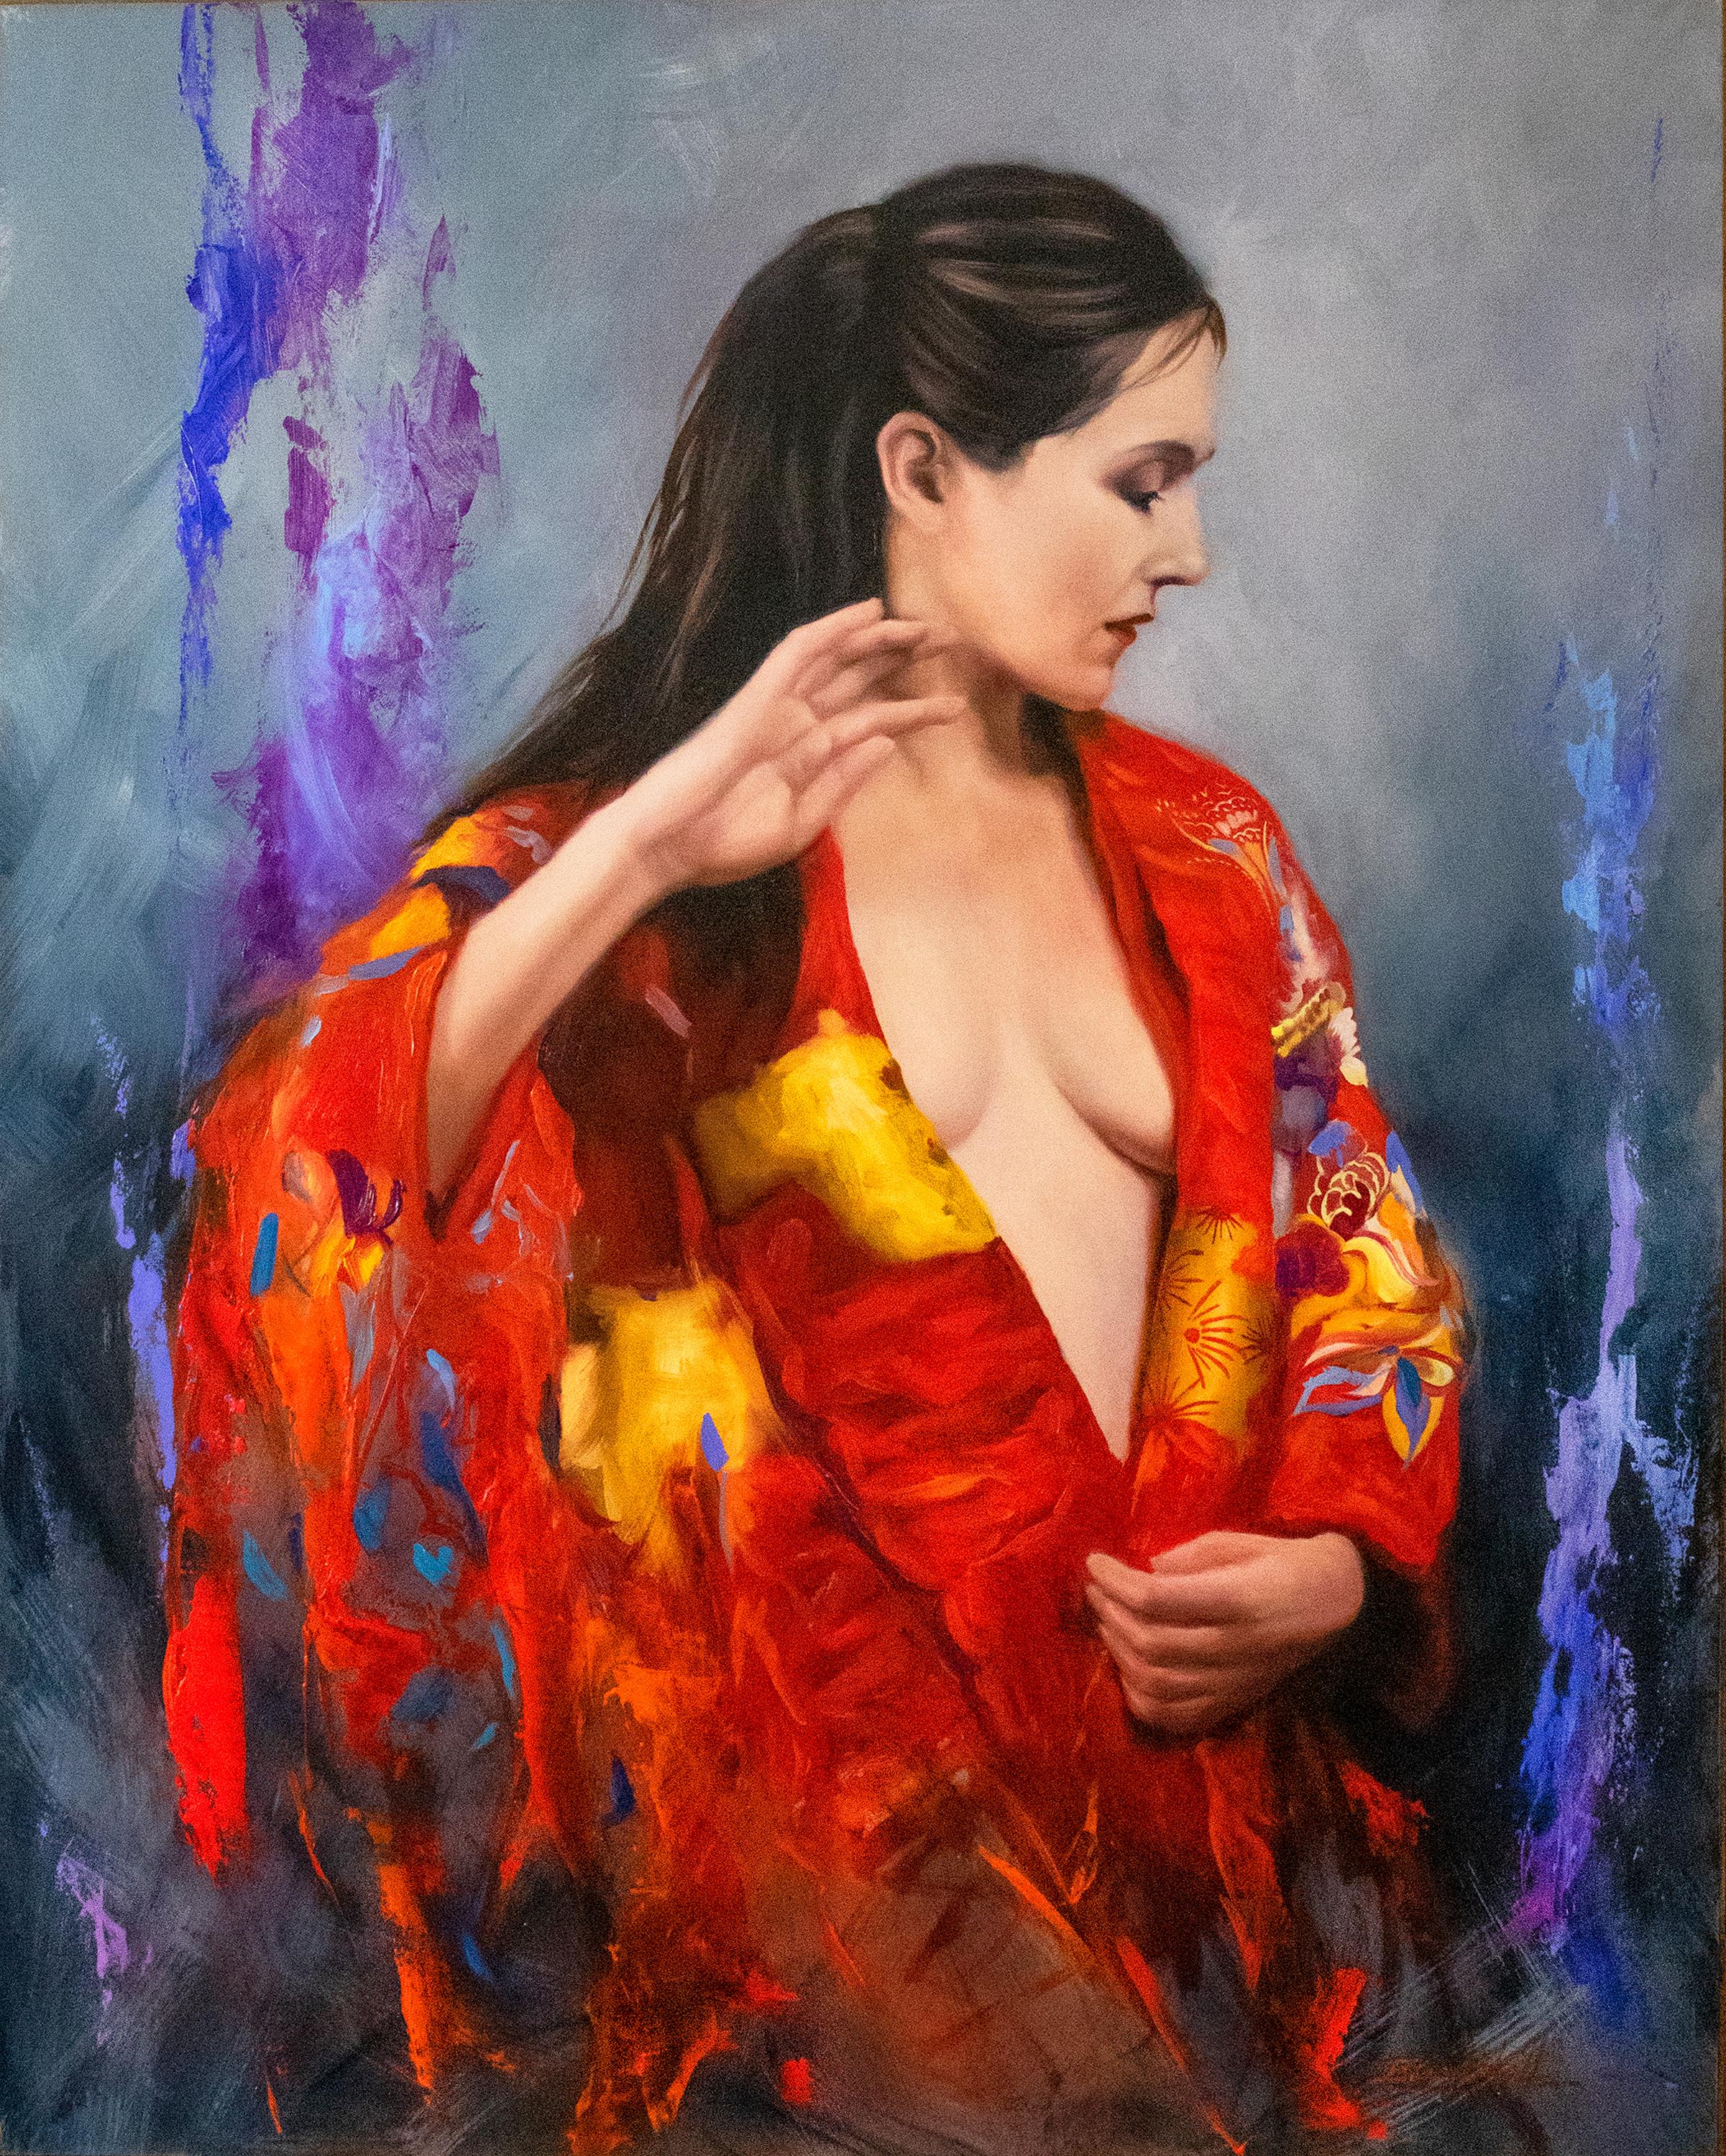 Brian O'Neill Nude Painting - "Epiphany, " Oil painting